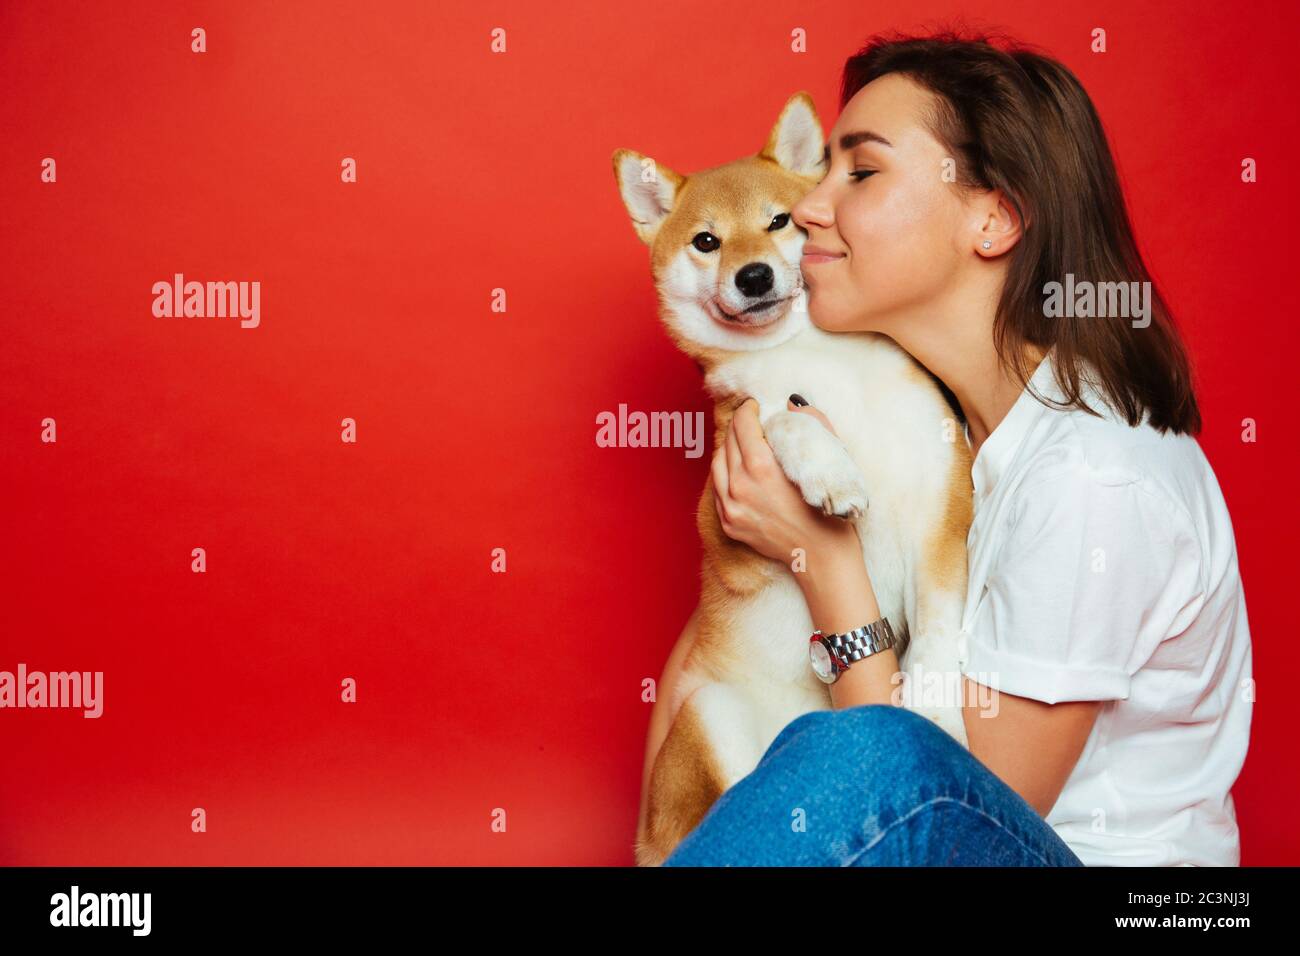 Cute brunette woman in white t shirt and jeans holding and embracing Shiba Inu dog on plane red background. Love to the animals, pets concept Stock Photo